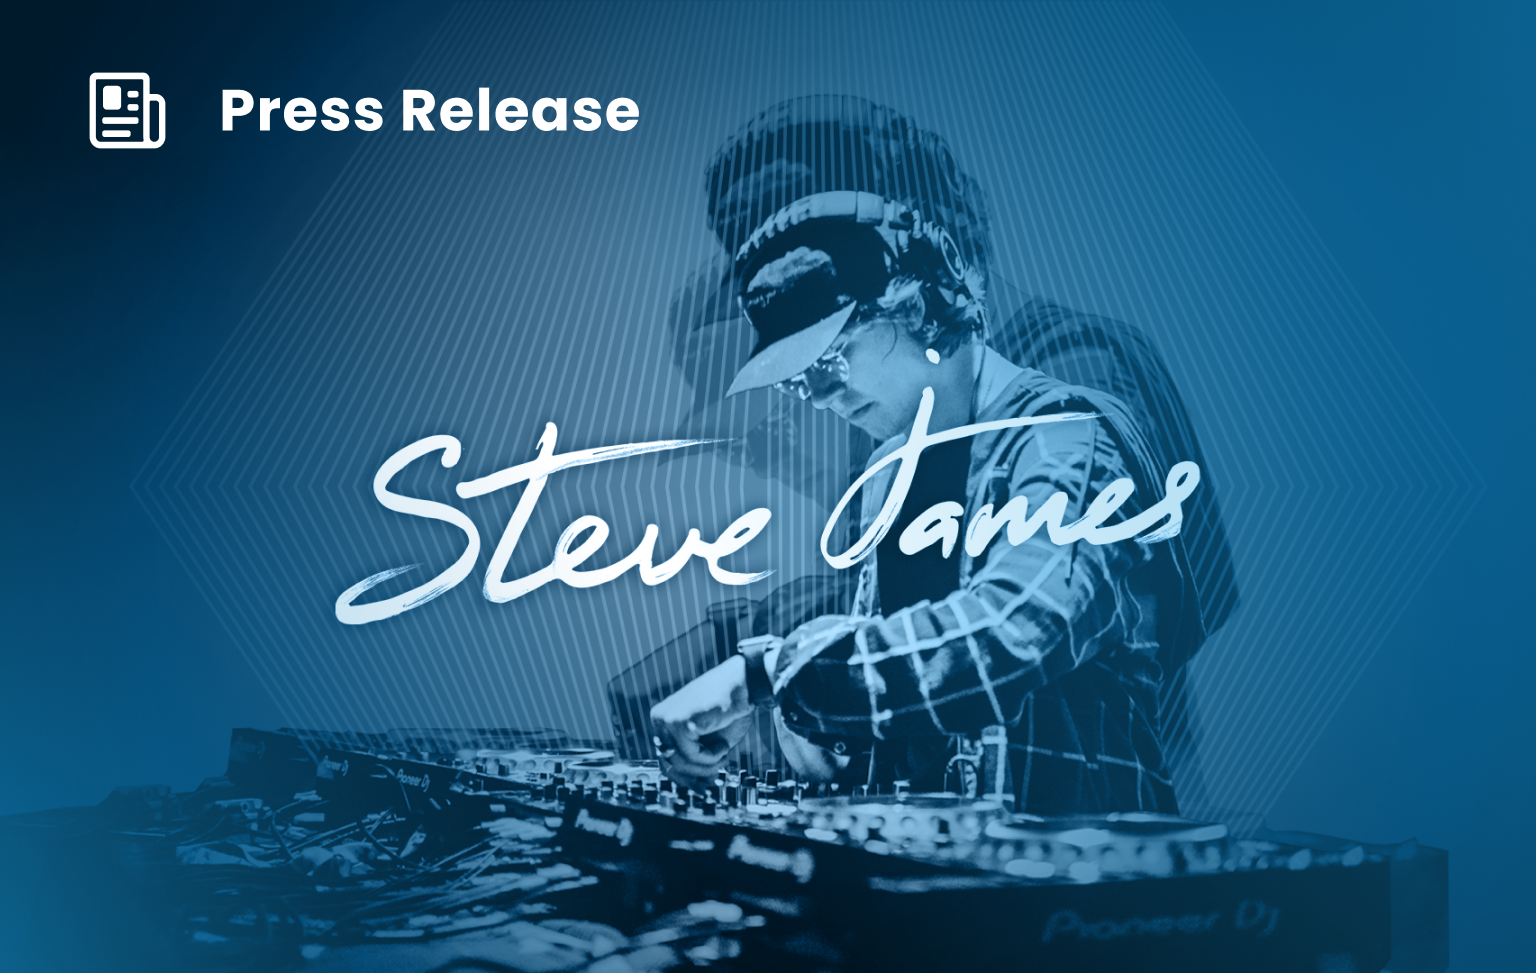 ANote partners with producer Steve James to list “In the Name of Love” and other mega hits to music fans and investors